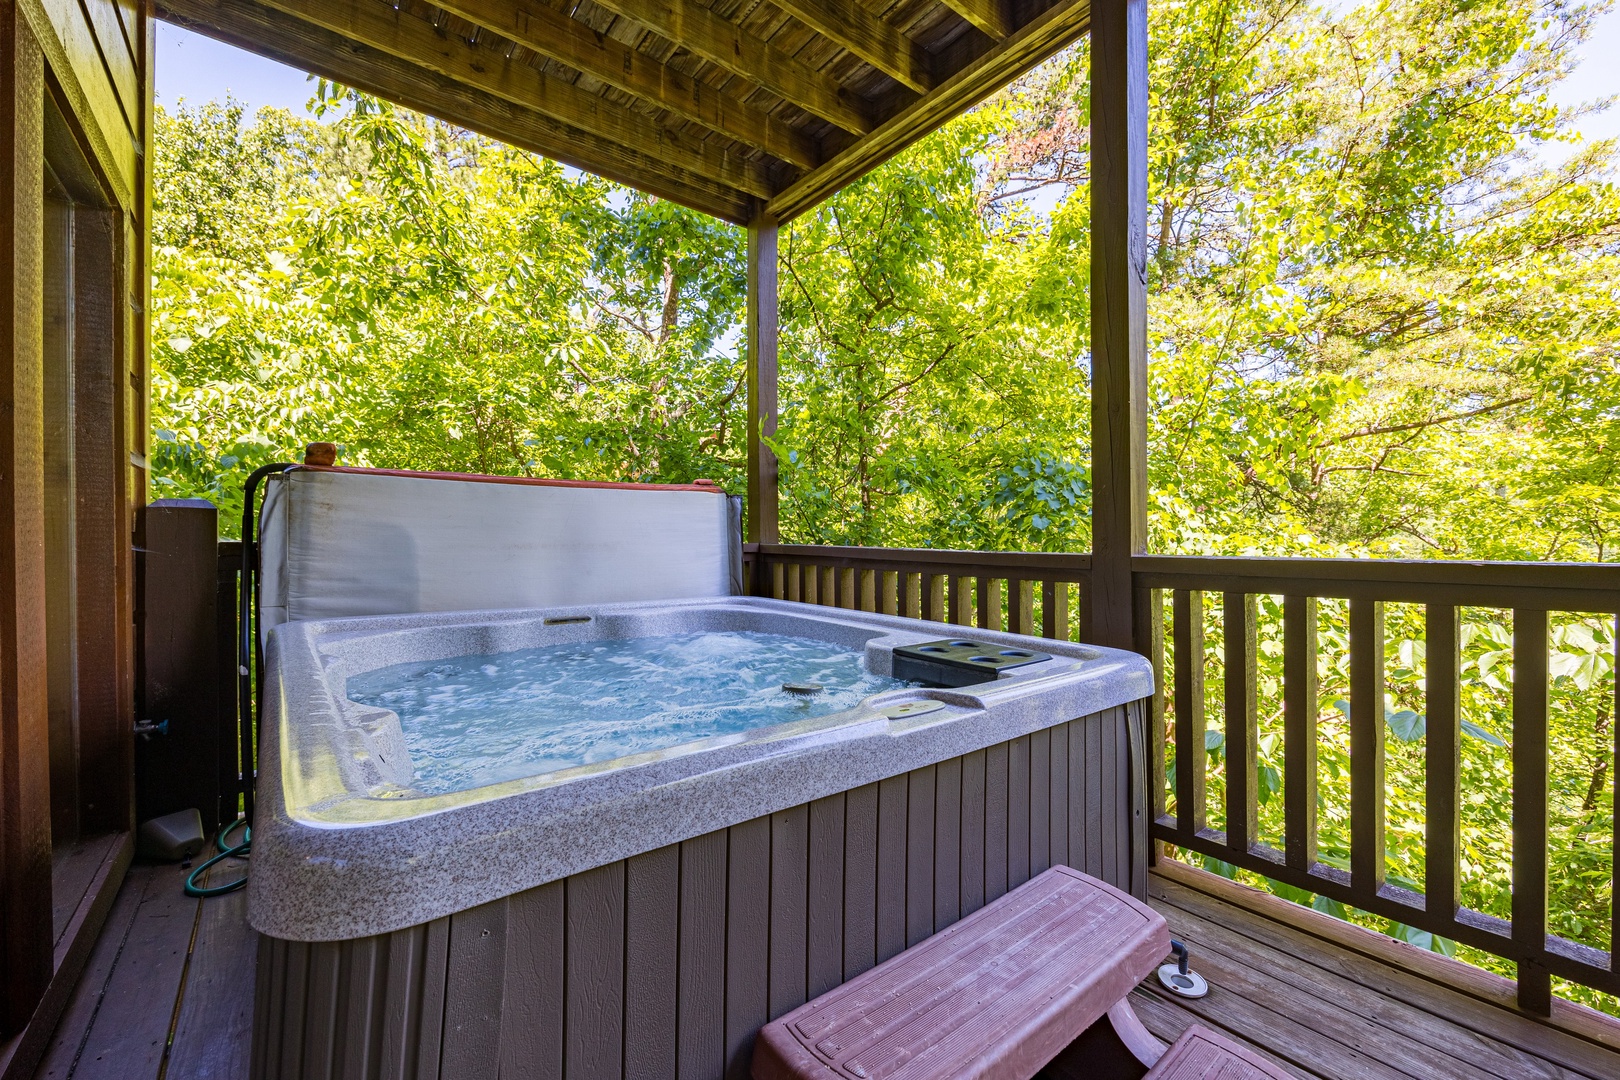 Hot tub at Moonbeams & Cabin Dreams, a 3 bedroom cabin rental located in Pigeon Forge